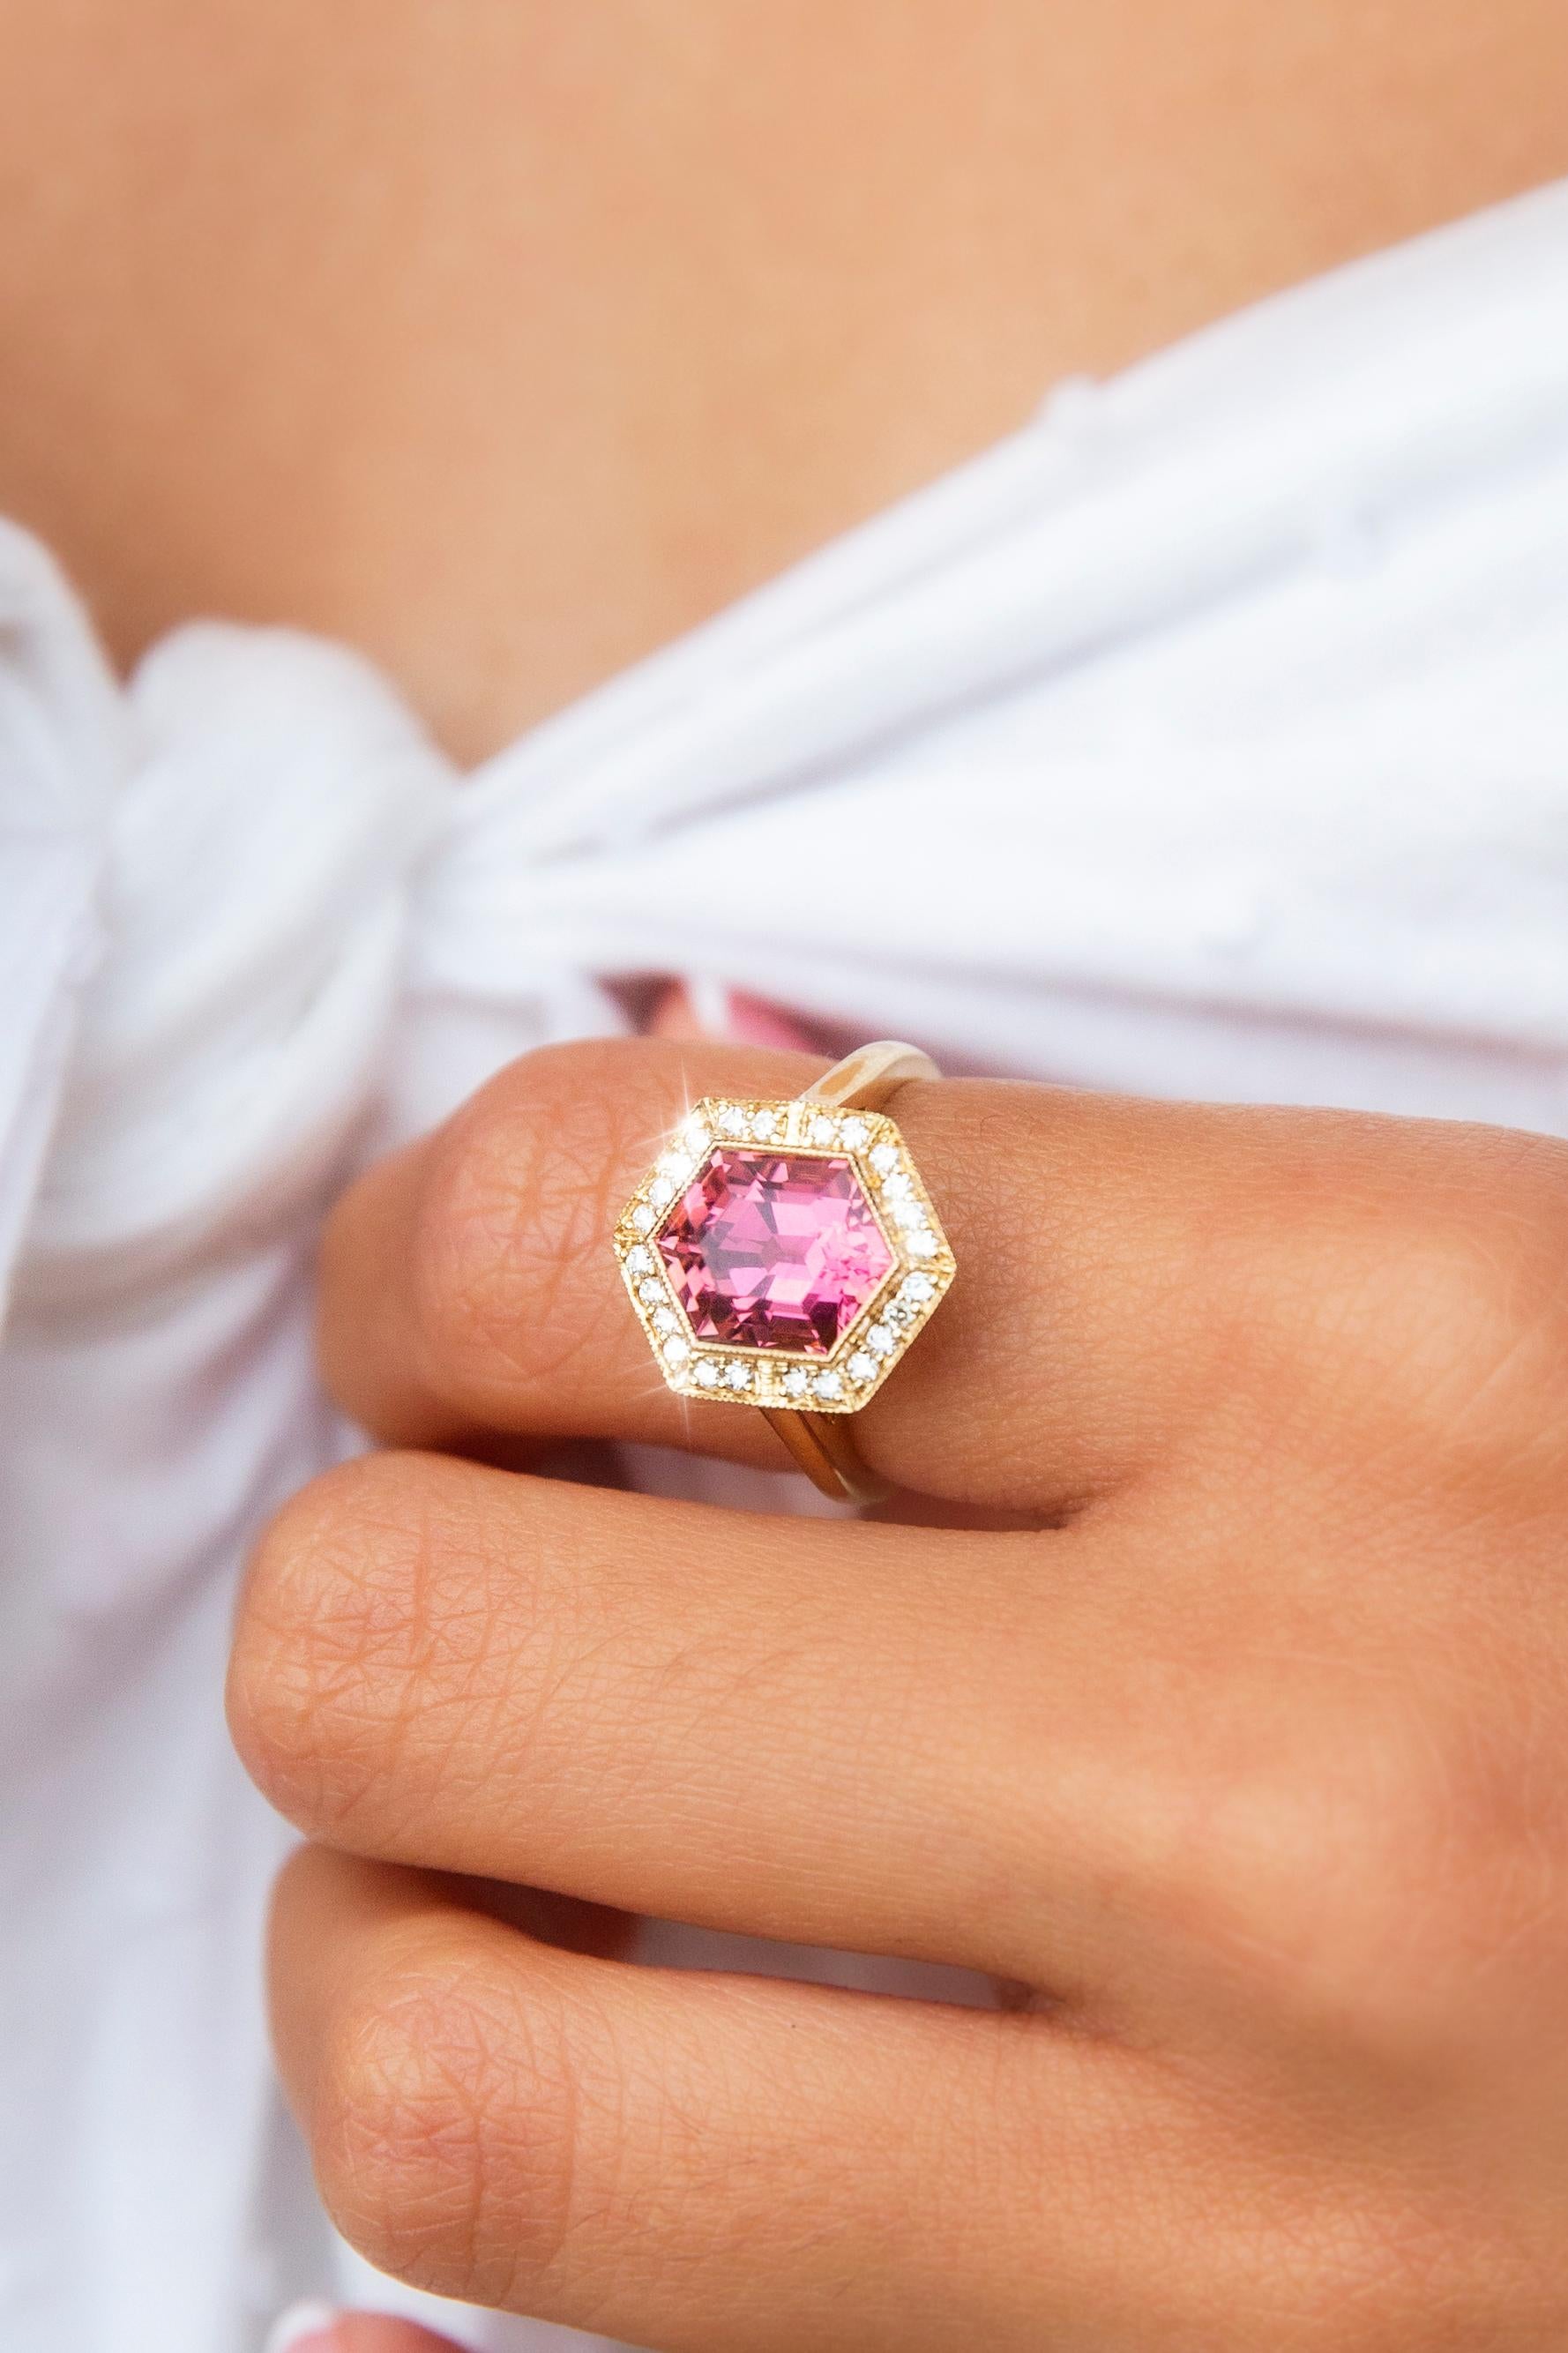 Crafted with love and care in 18 carat yellow gold, this breathtaking contemporary ring features a gorgeous peach-pink hexagonal cut tourmaline at the centre of an elegant basket setting with a shimmering border of bead set round brilliant cut